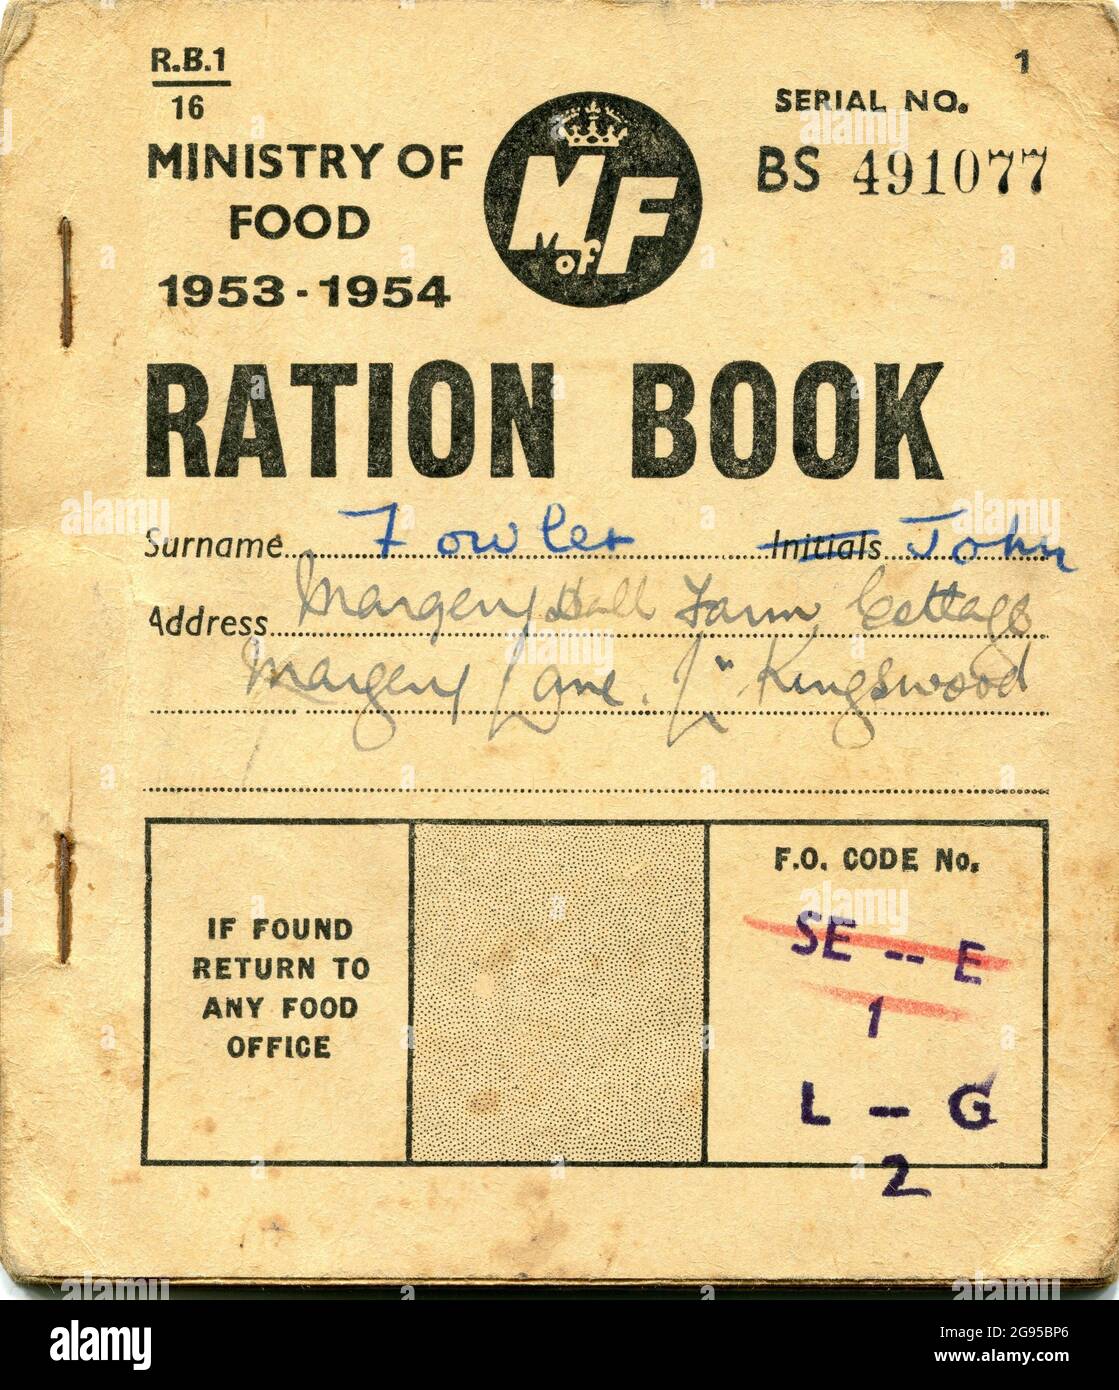 A British food ration coupon book. Introduced in 1940 during the Second World War, rationing ended in 1954. Stock Photo